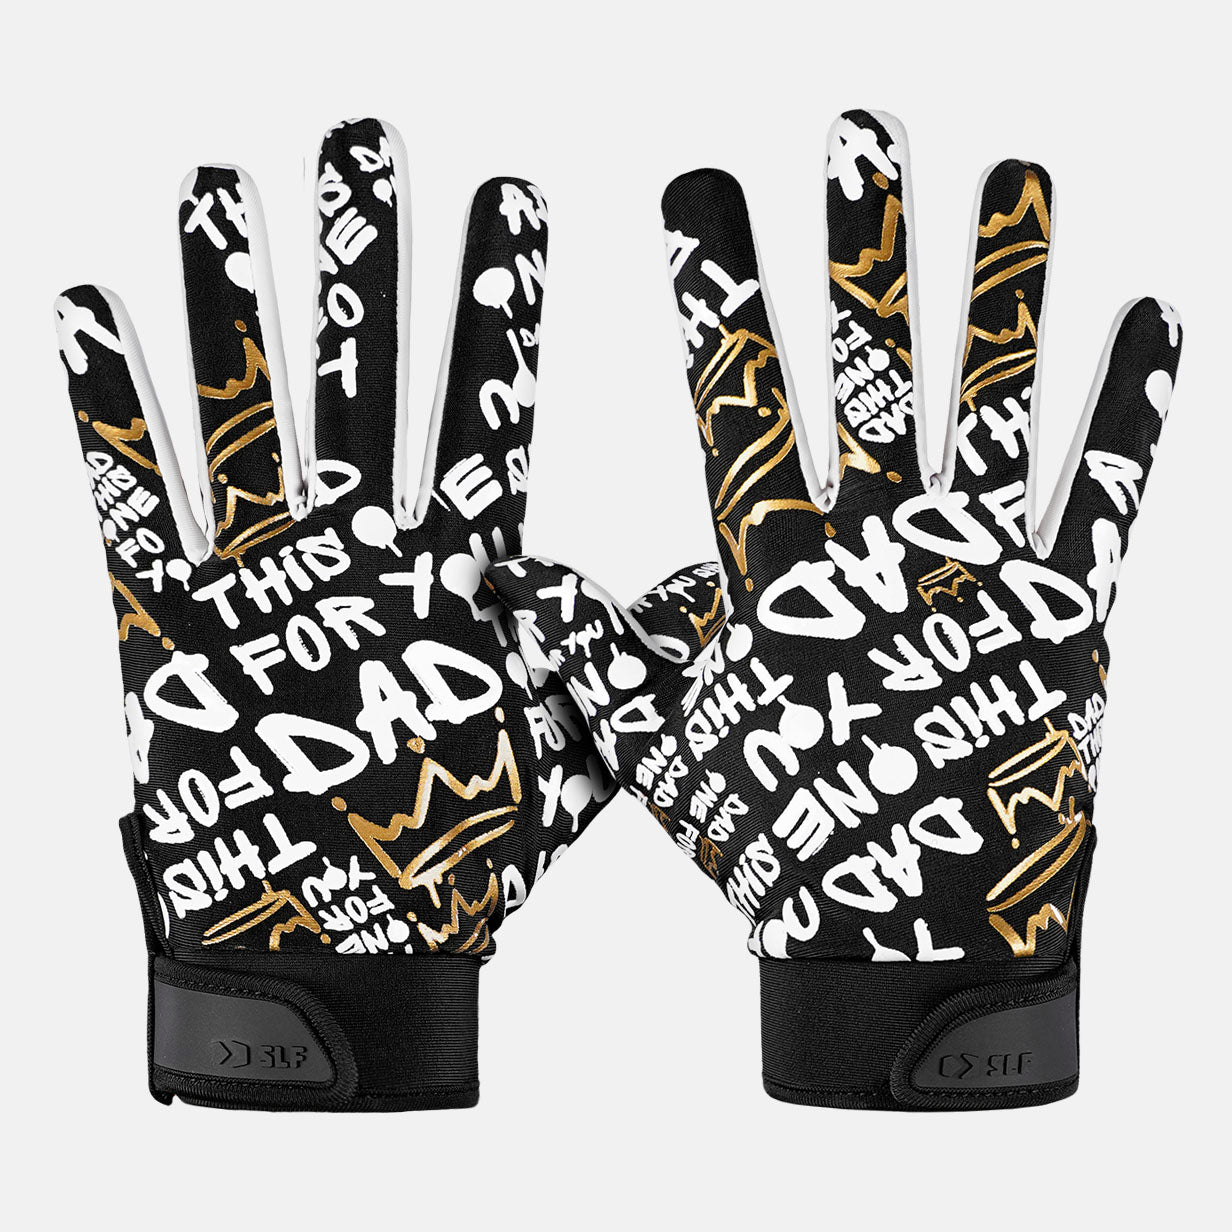 Dad This one For You Sticky Football Receiver Gloves